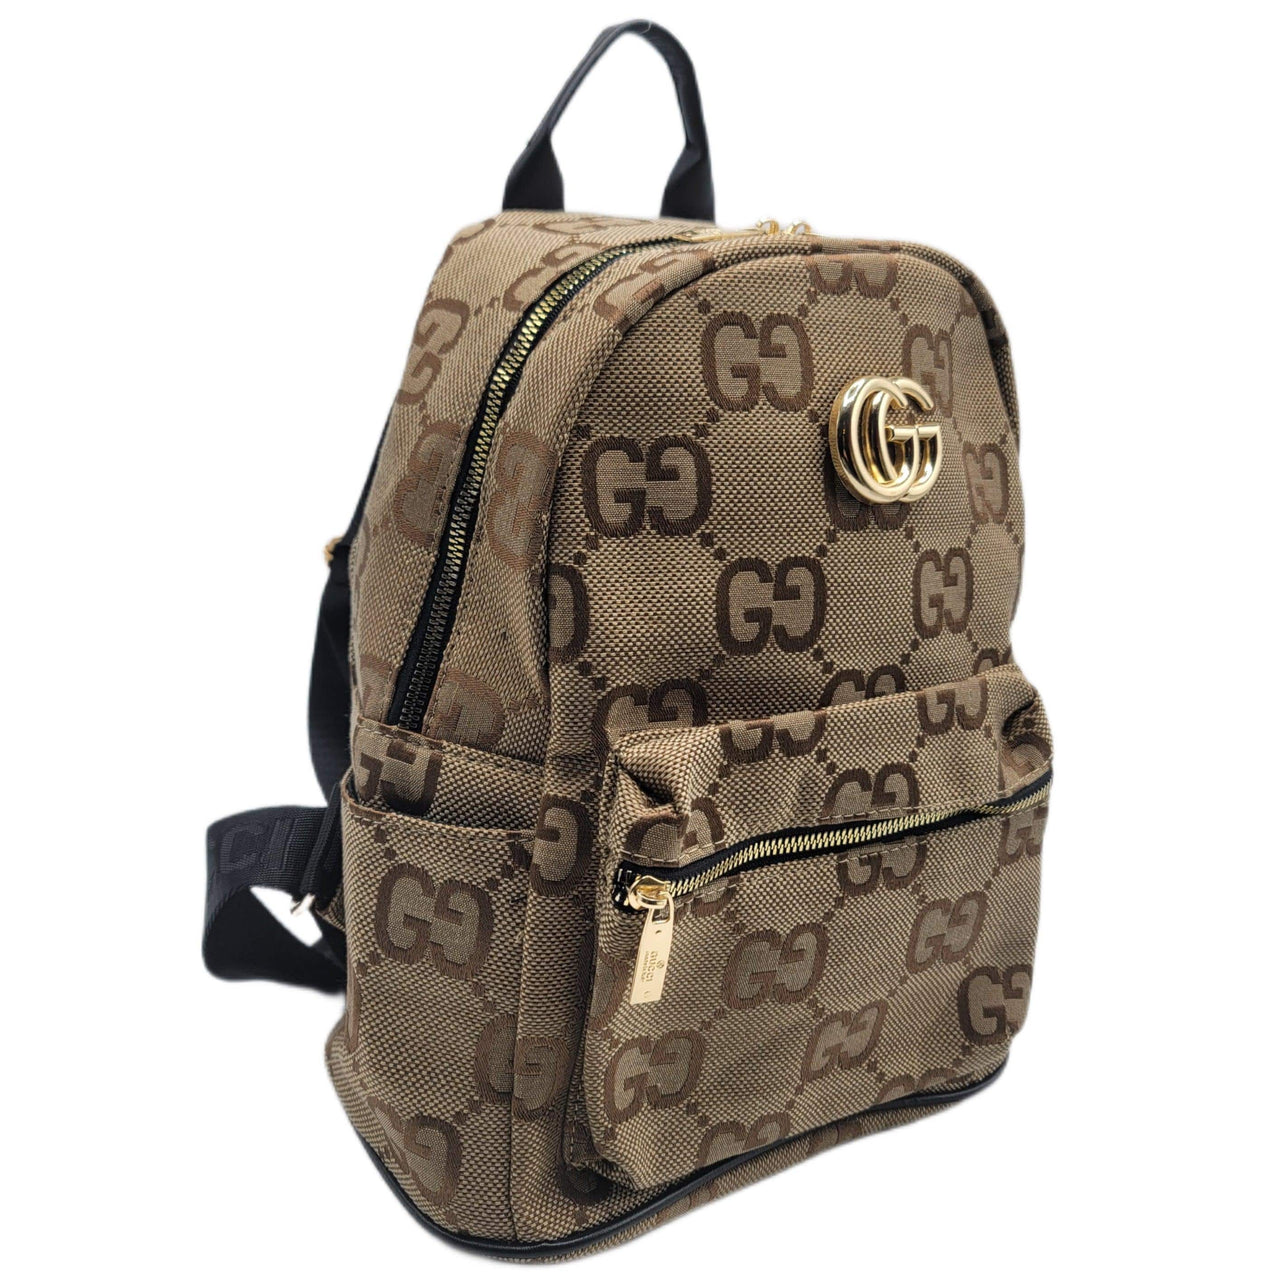 The Bag Couture Handbags, Wallets & Cases Gucci Ladies Backpack 2